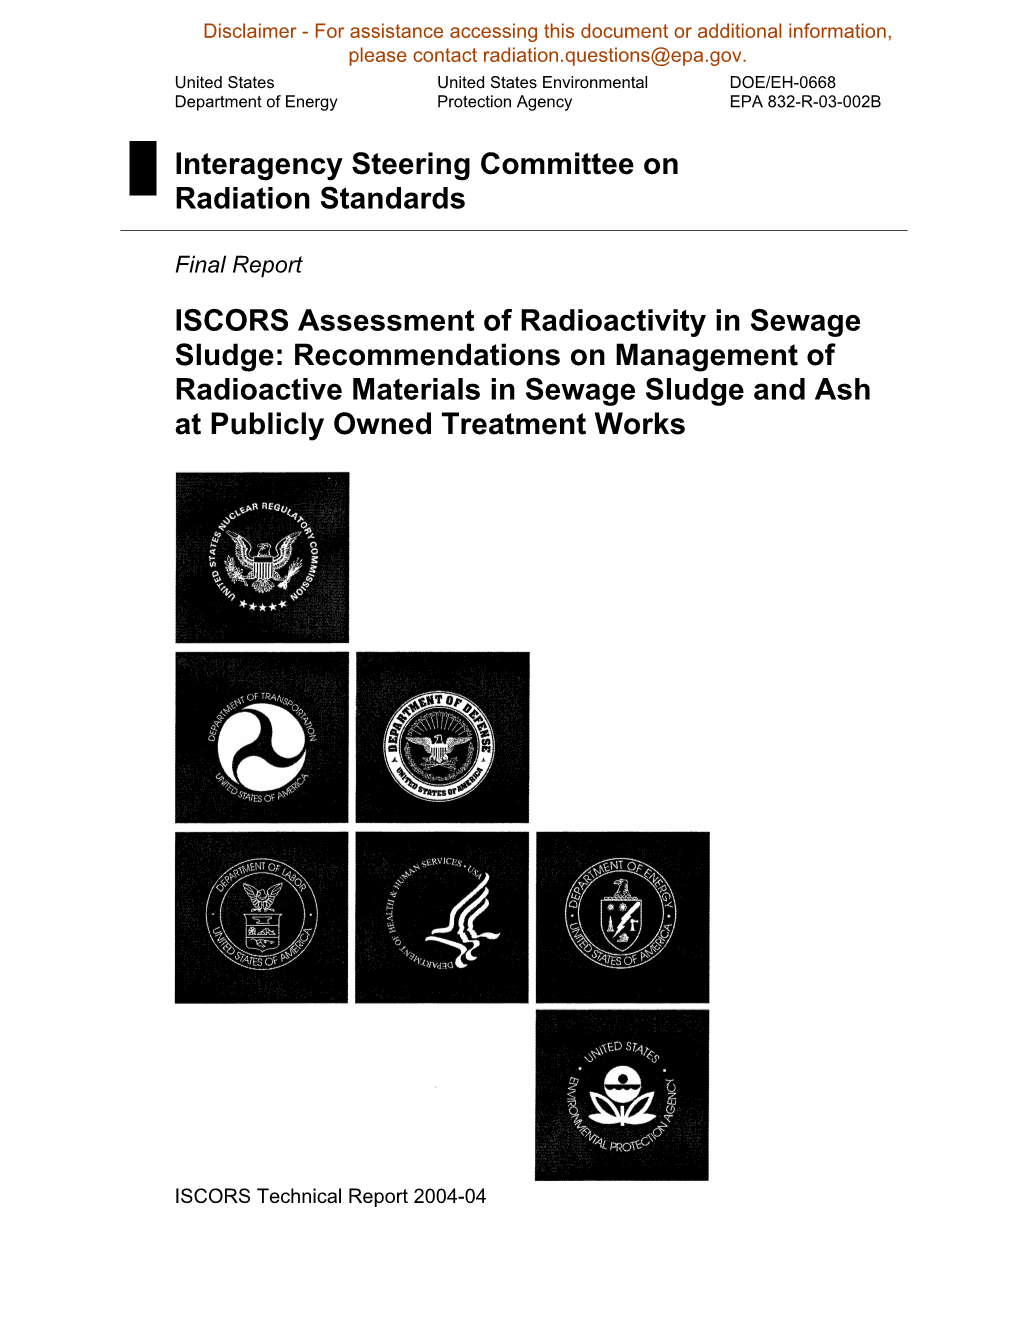 Final Report: ISCORS Assessment of Radioactivity in Sewage Sludge